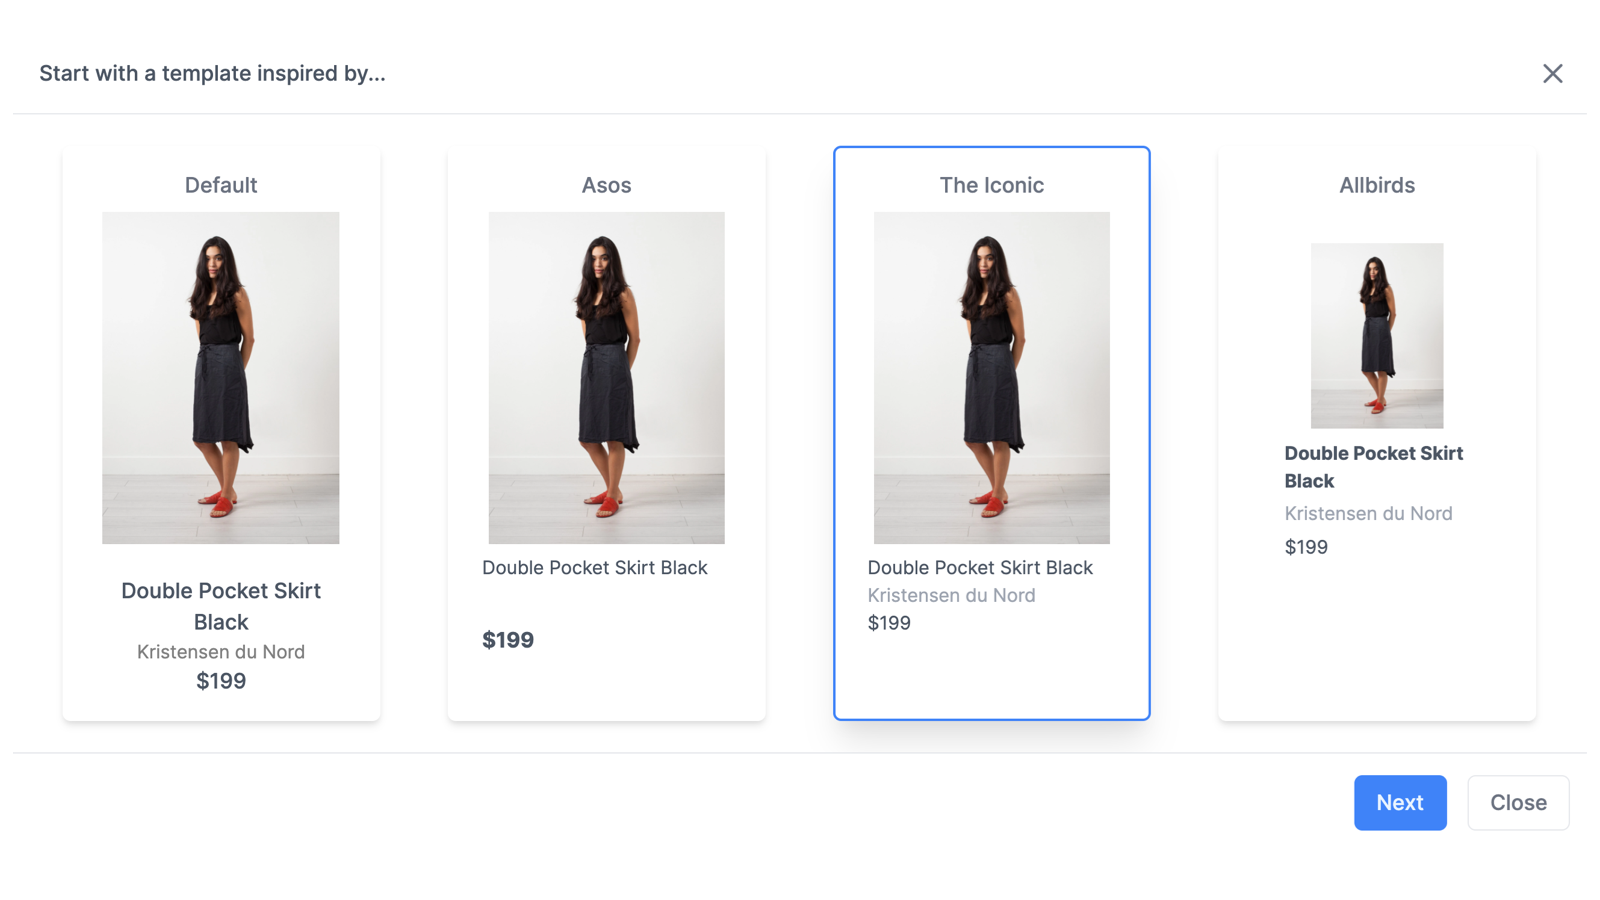 Custom result templates can be designed to match your theme